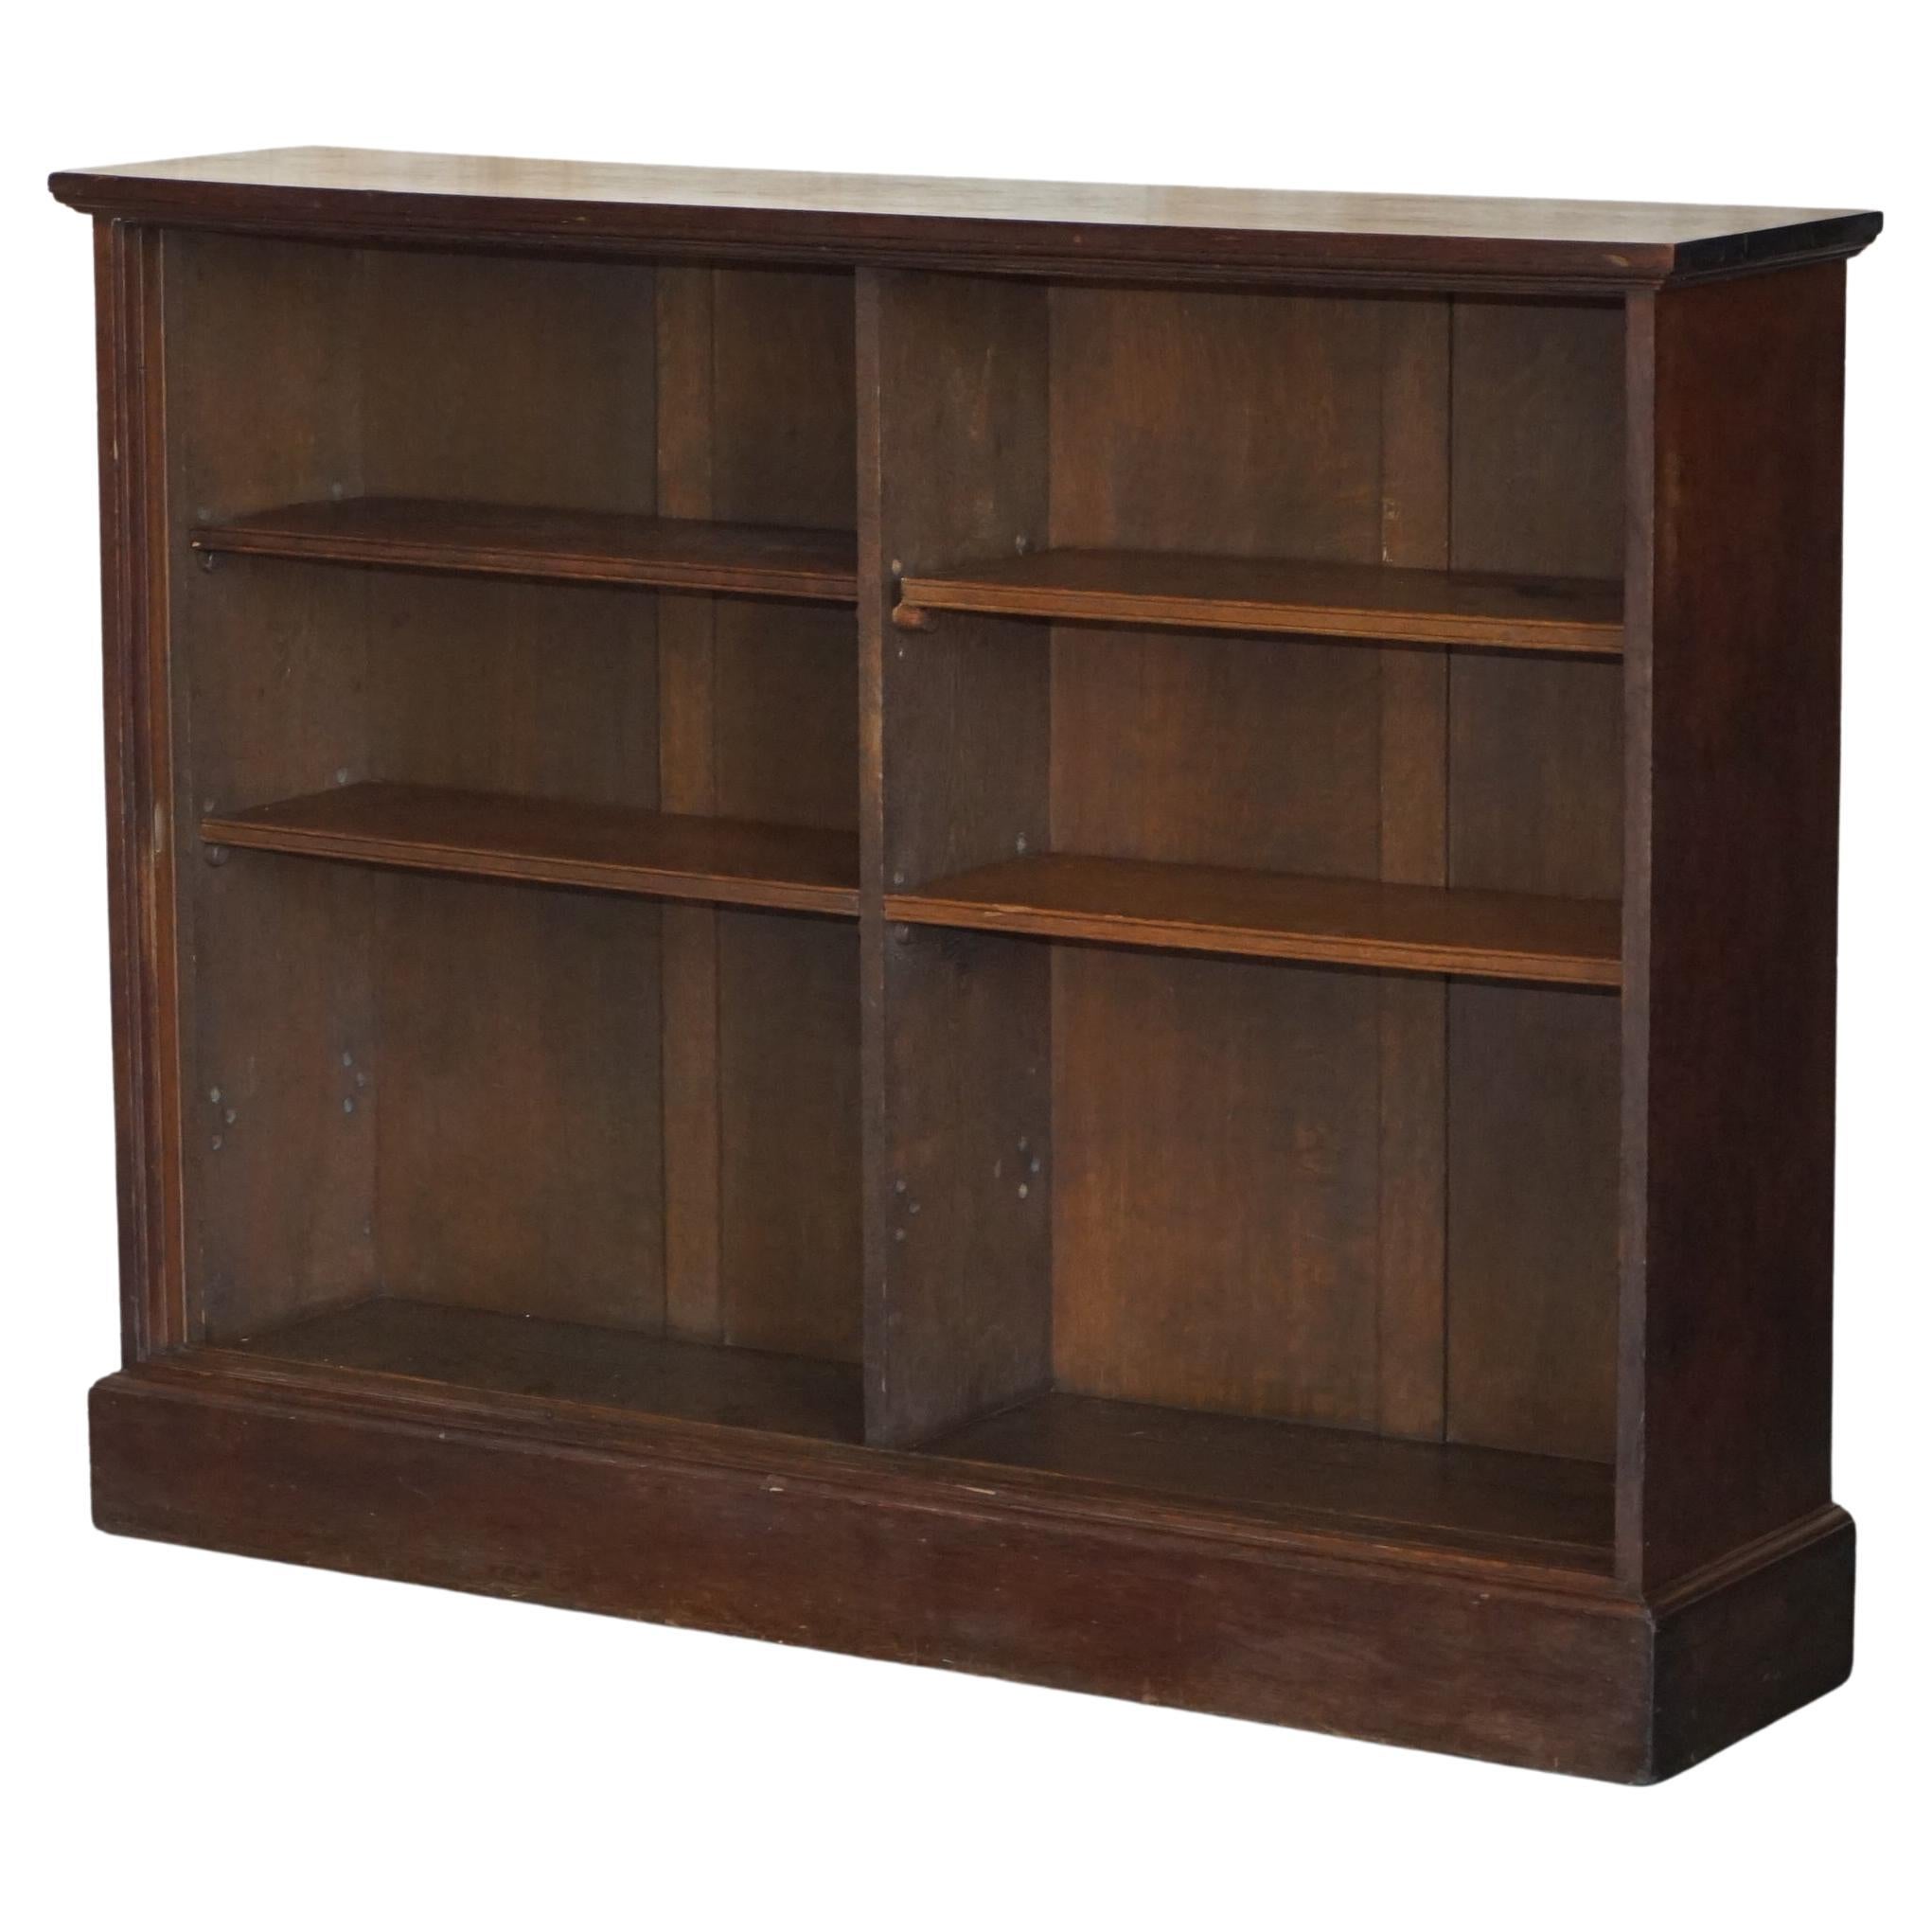 1 of 2 Antique Victorian Dwarf Open Library Bookcases with Two Shelves Per Side For Sale